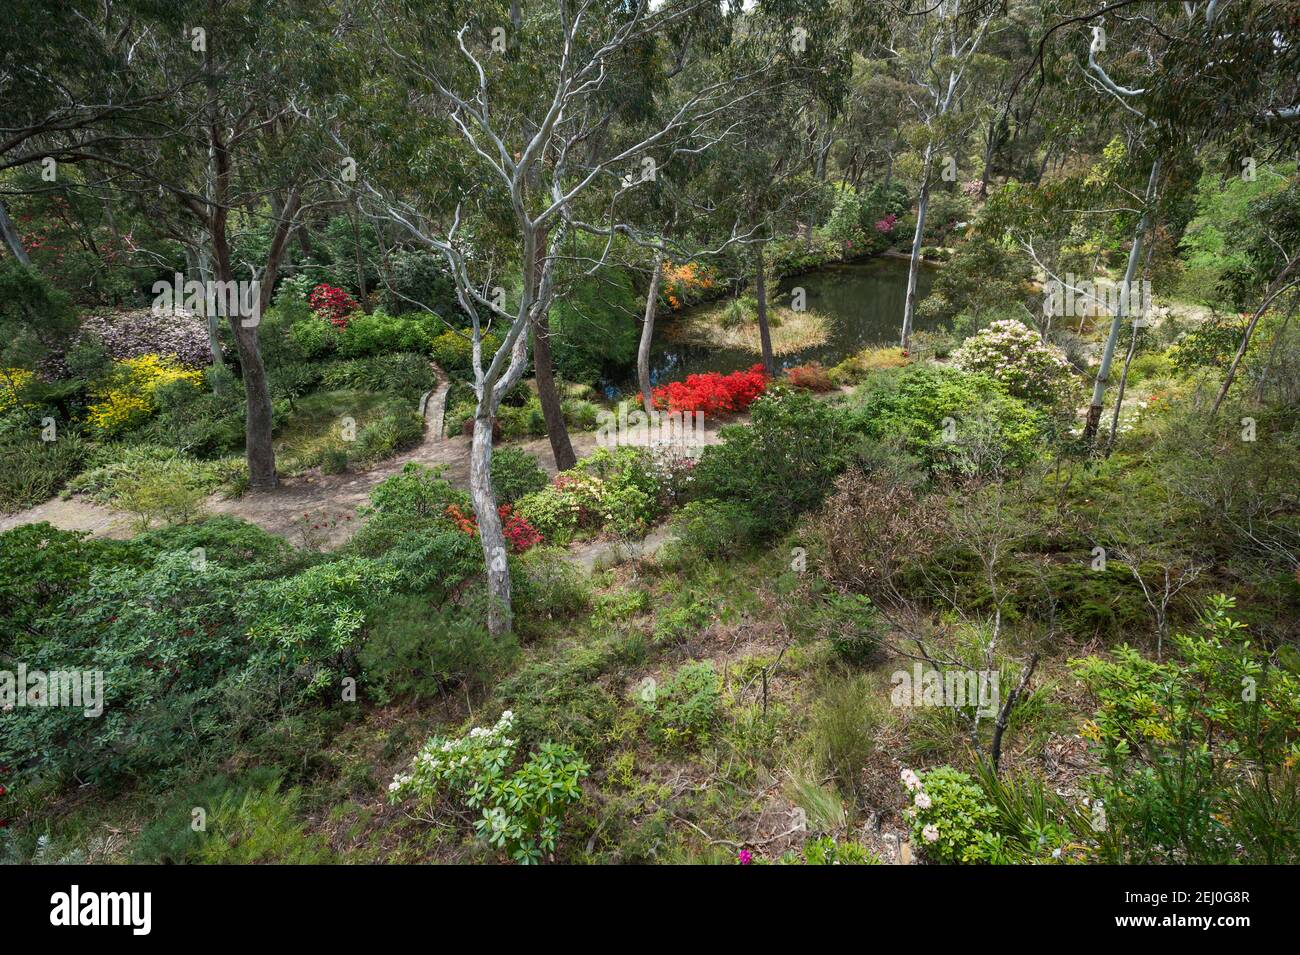 The Campbell Rhododendron Gardens, Blackheath, Blue Mountains, New South Wales, Australia. Stock Photo